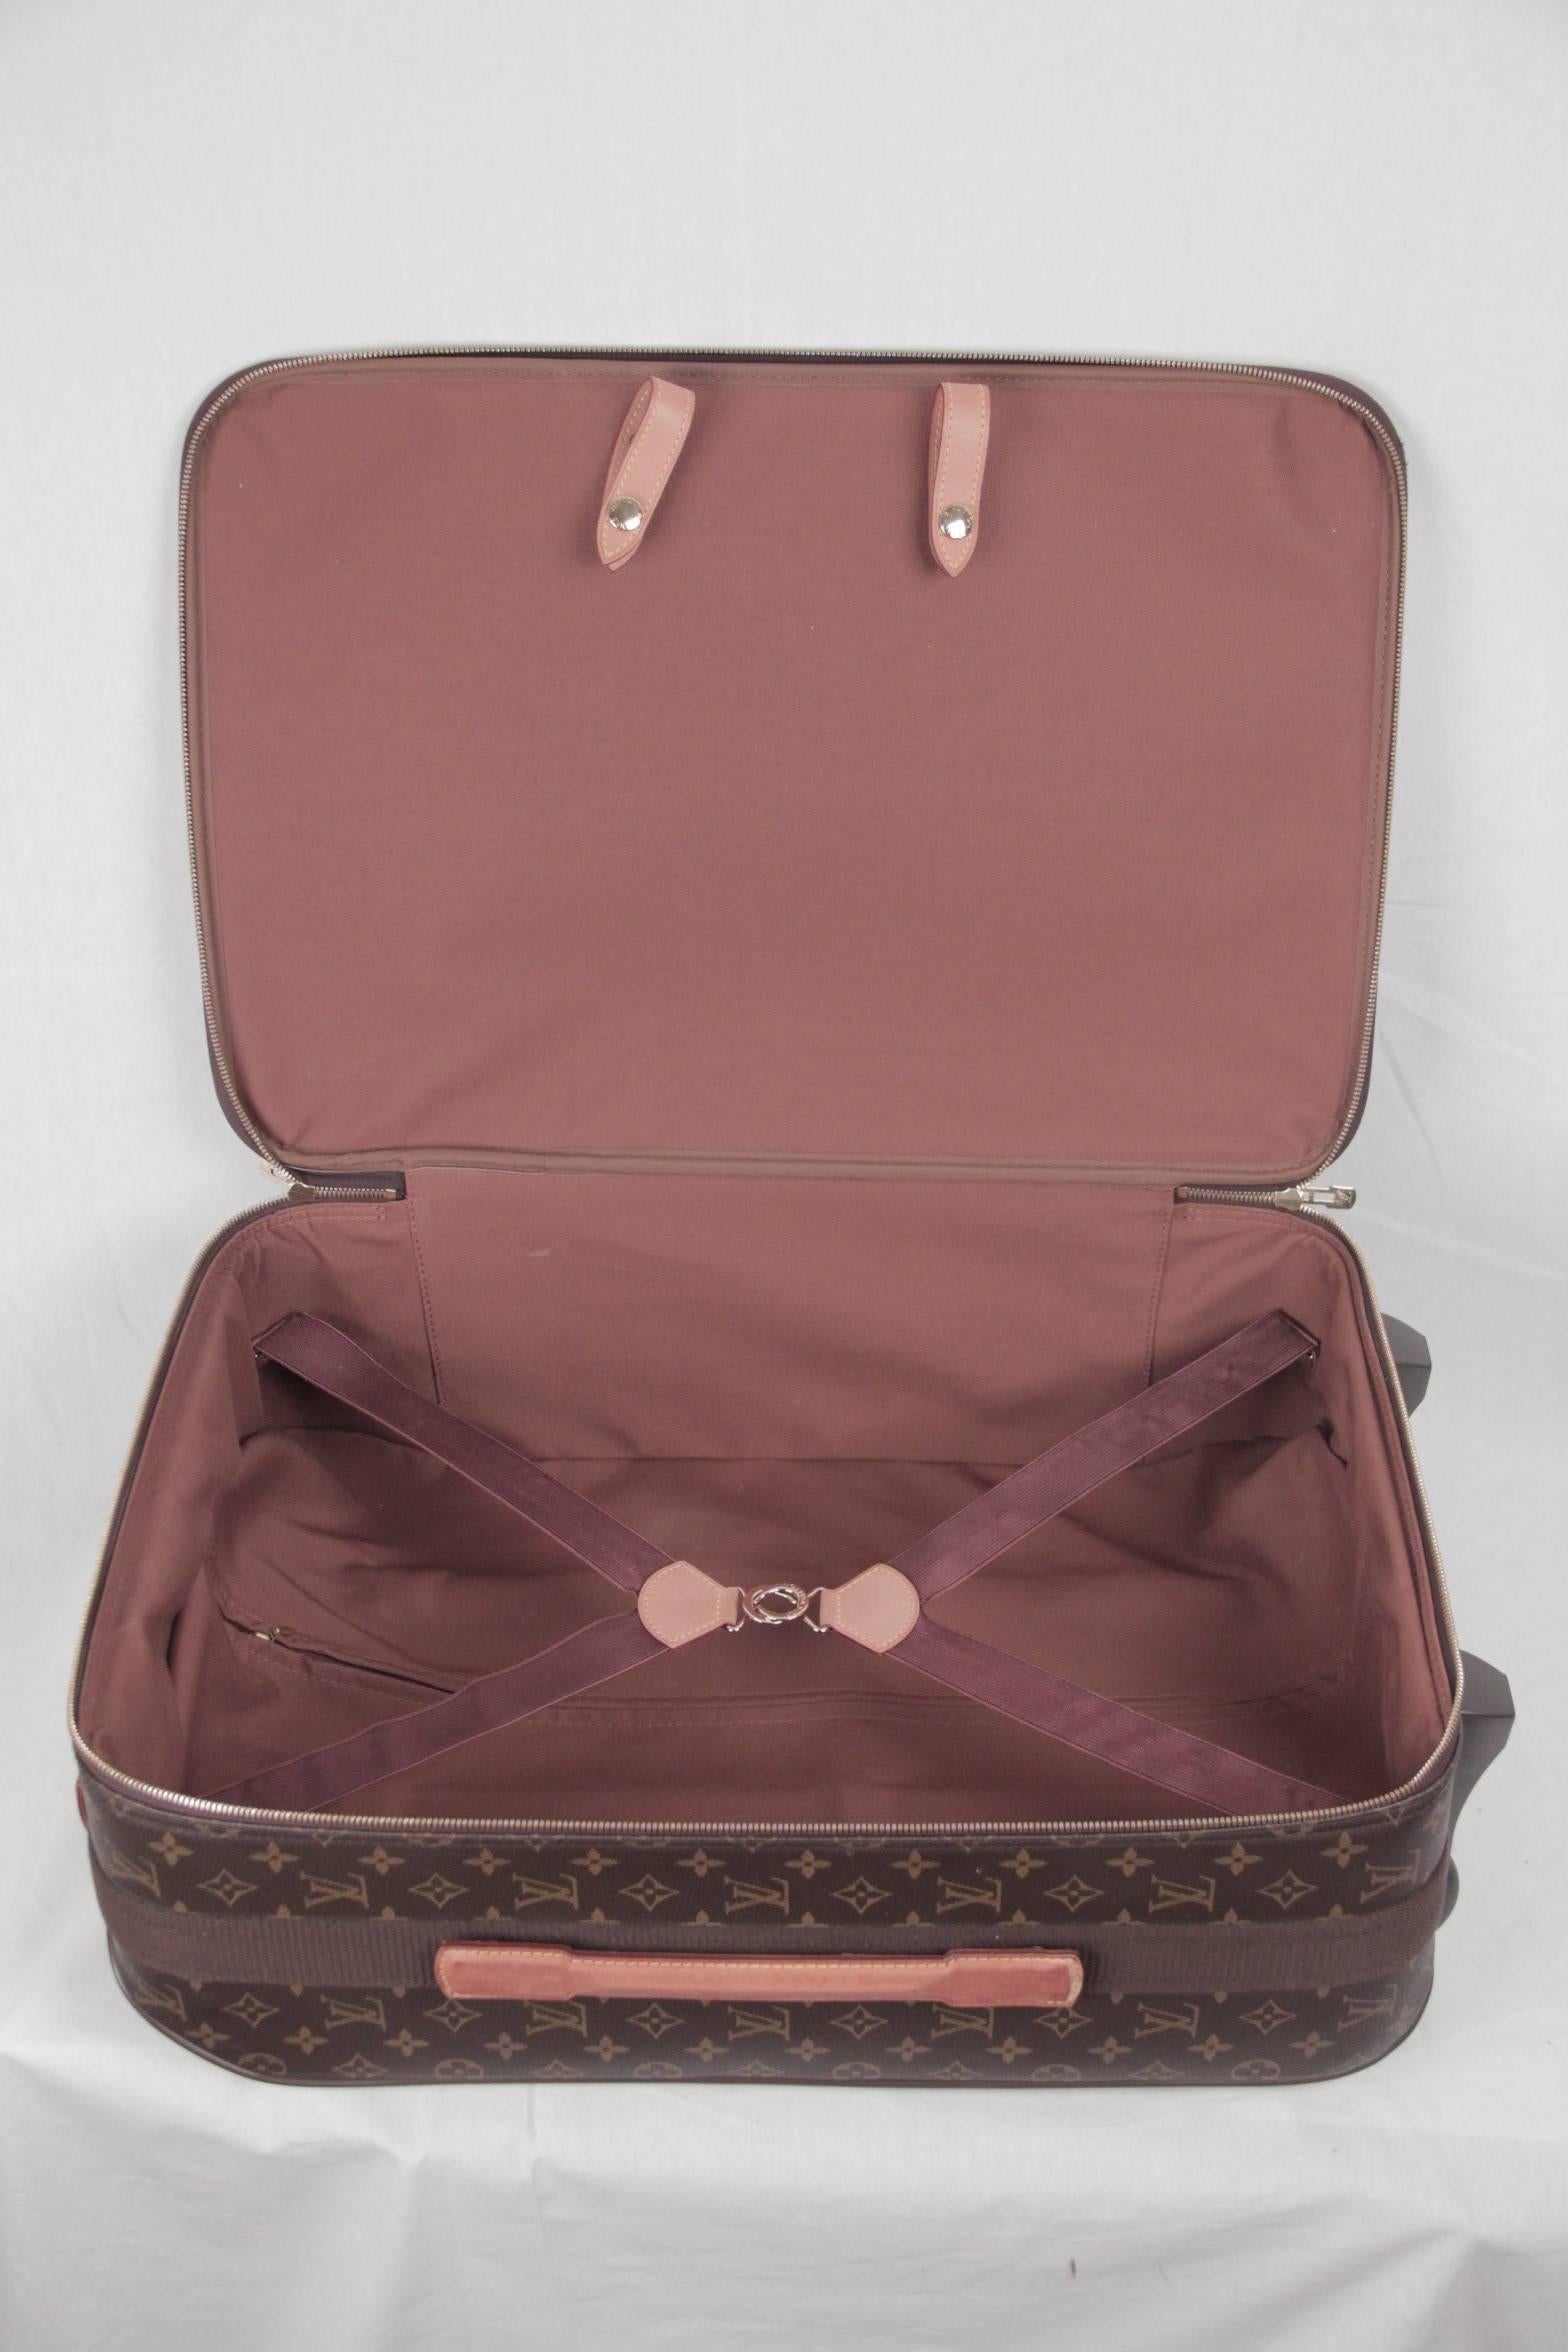 LOUIS VUITTON Monogram Canvas PEGASE 60 Rolling SUITCASE Travel Bag In Good Condition In Rome, Rome